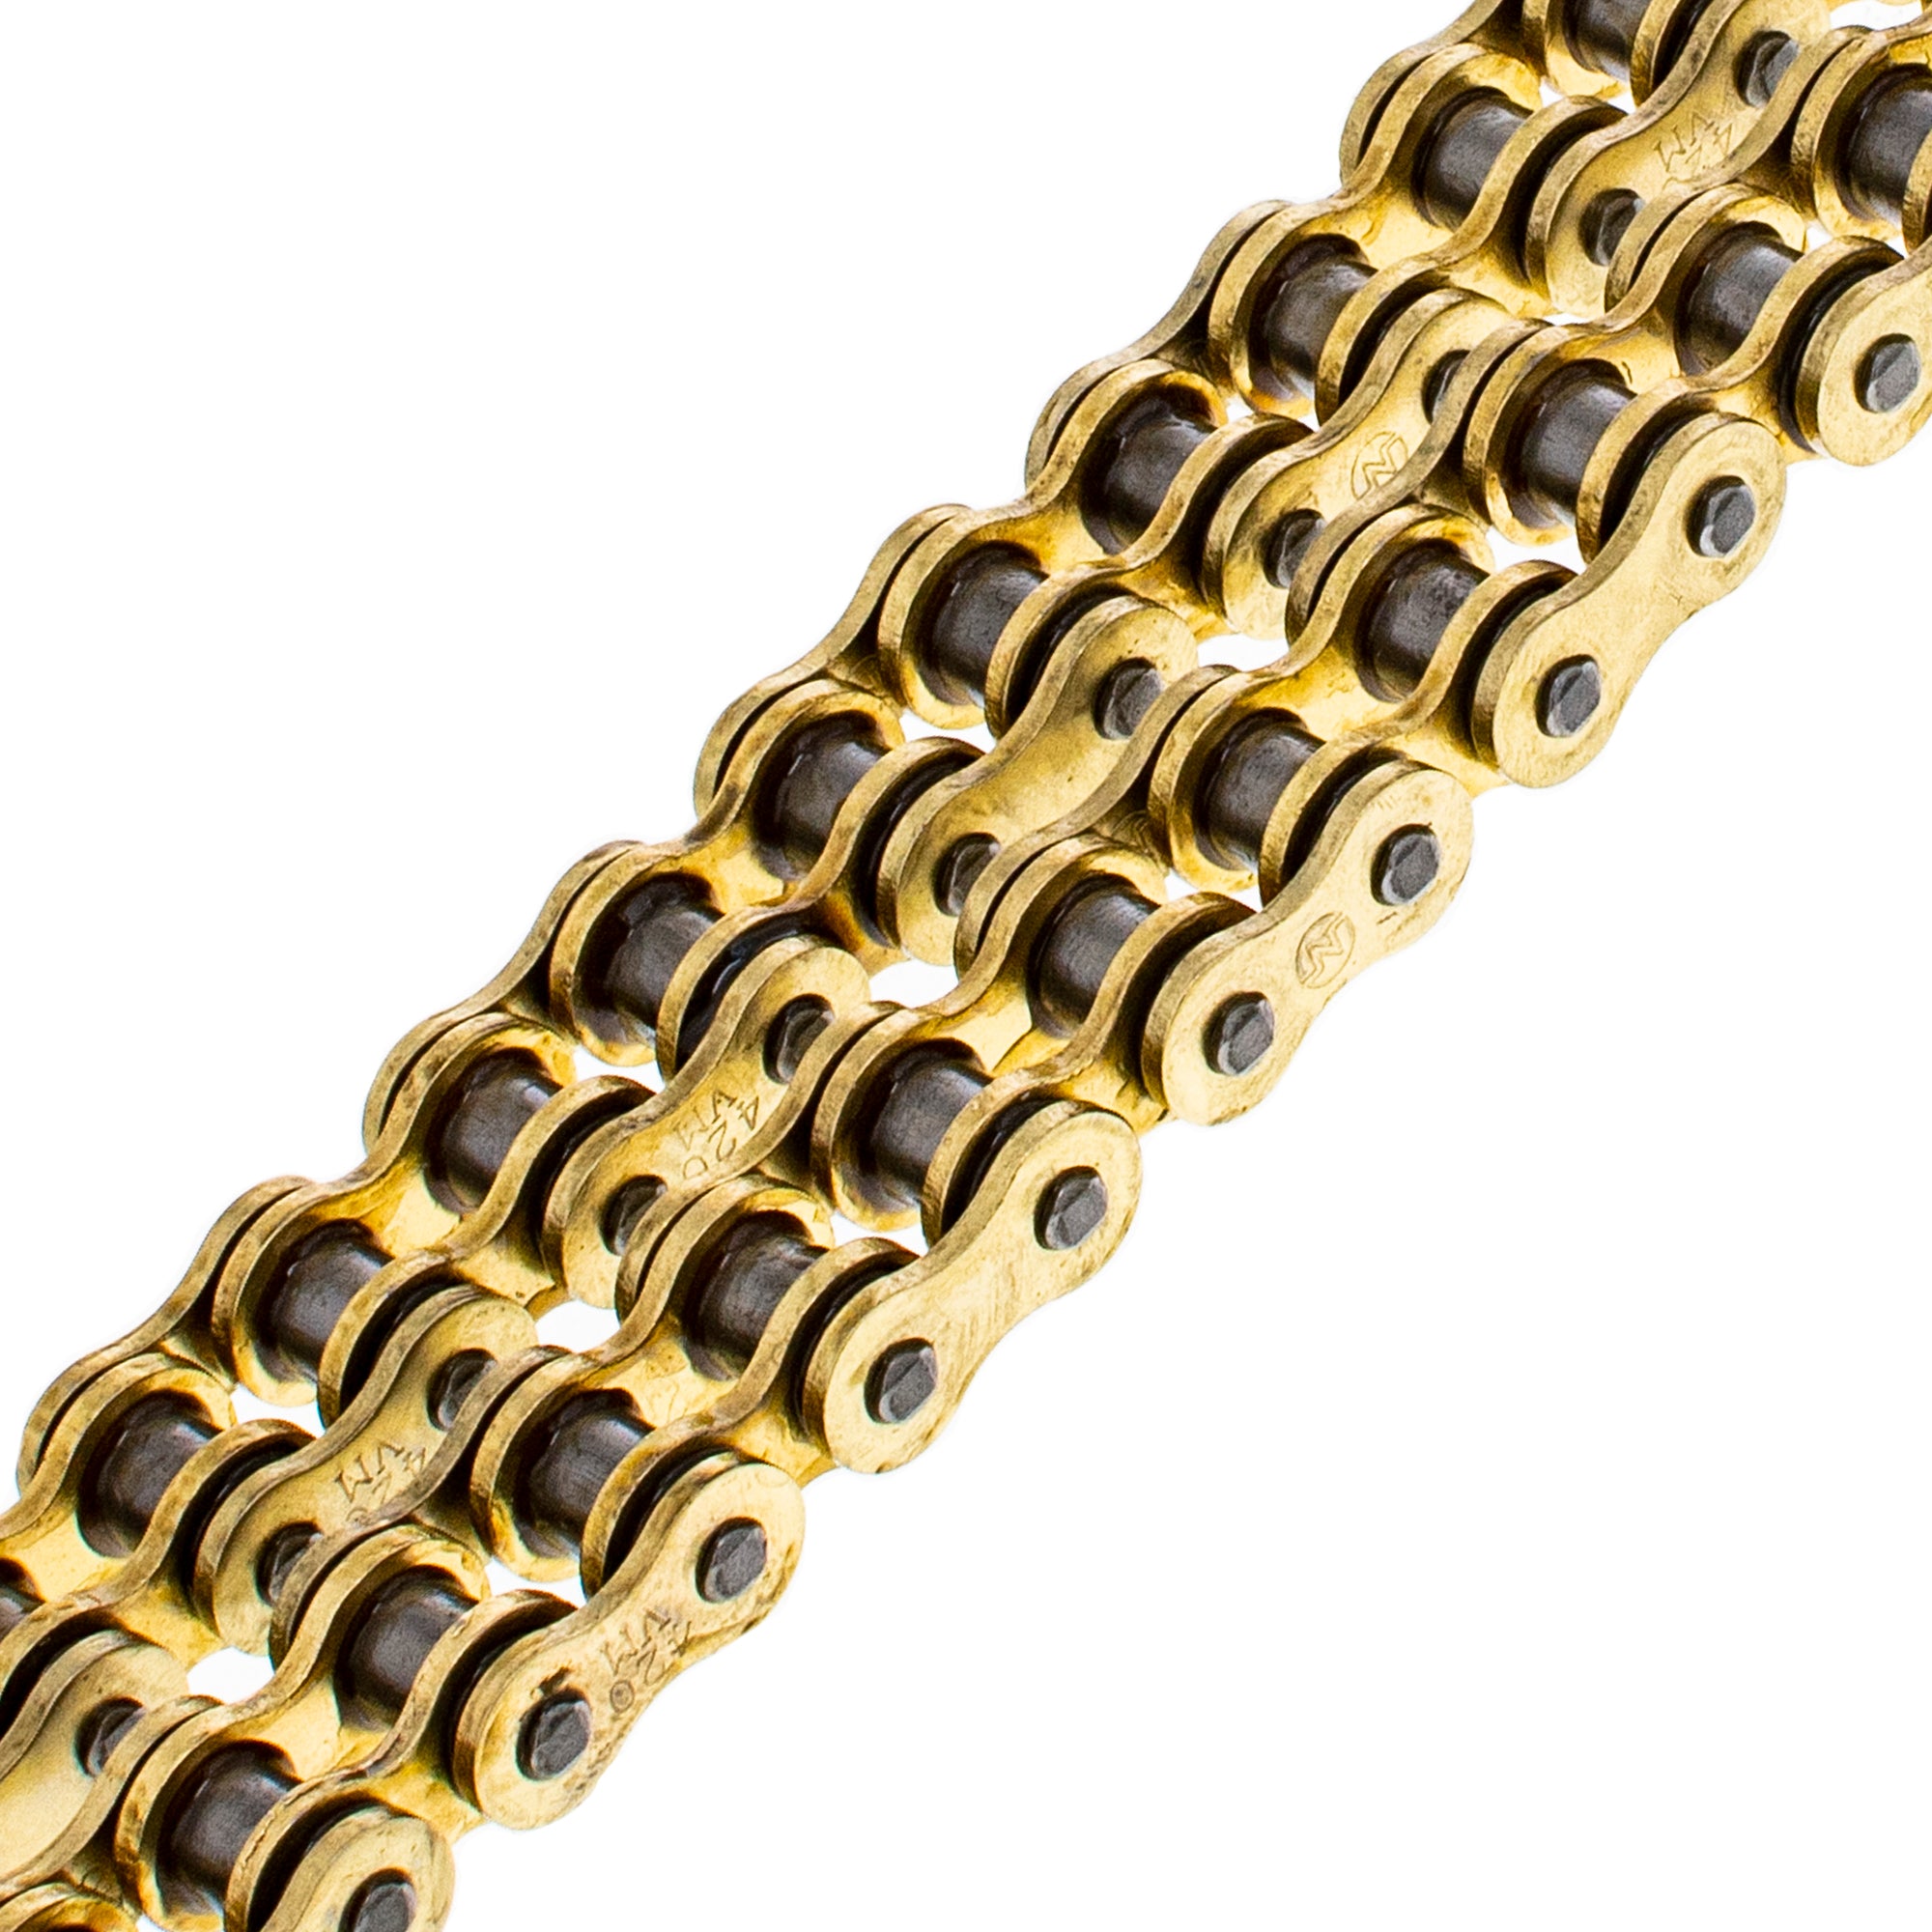 Gold X-Ring Chain 98 w/ Master Link for zOTHER Honda YZ60 OR50 Monkey DR50 420VX-98 NICHE 519-CDC2598H